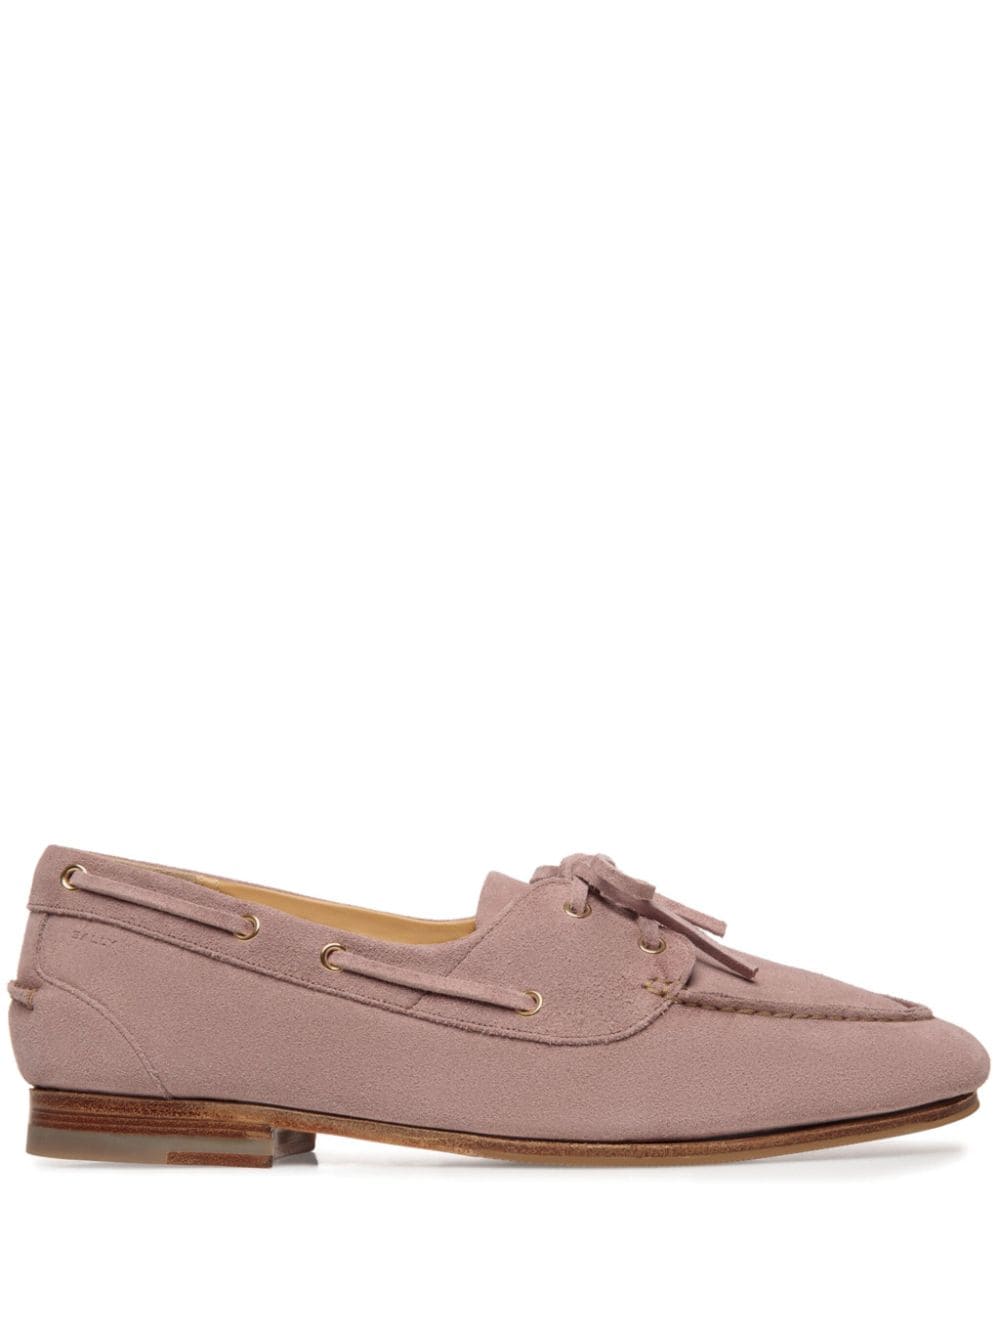 Bally Plume Boat Shoes In Pink